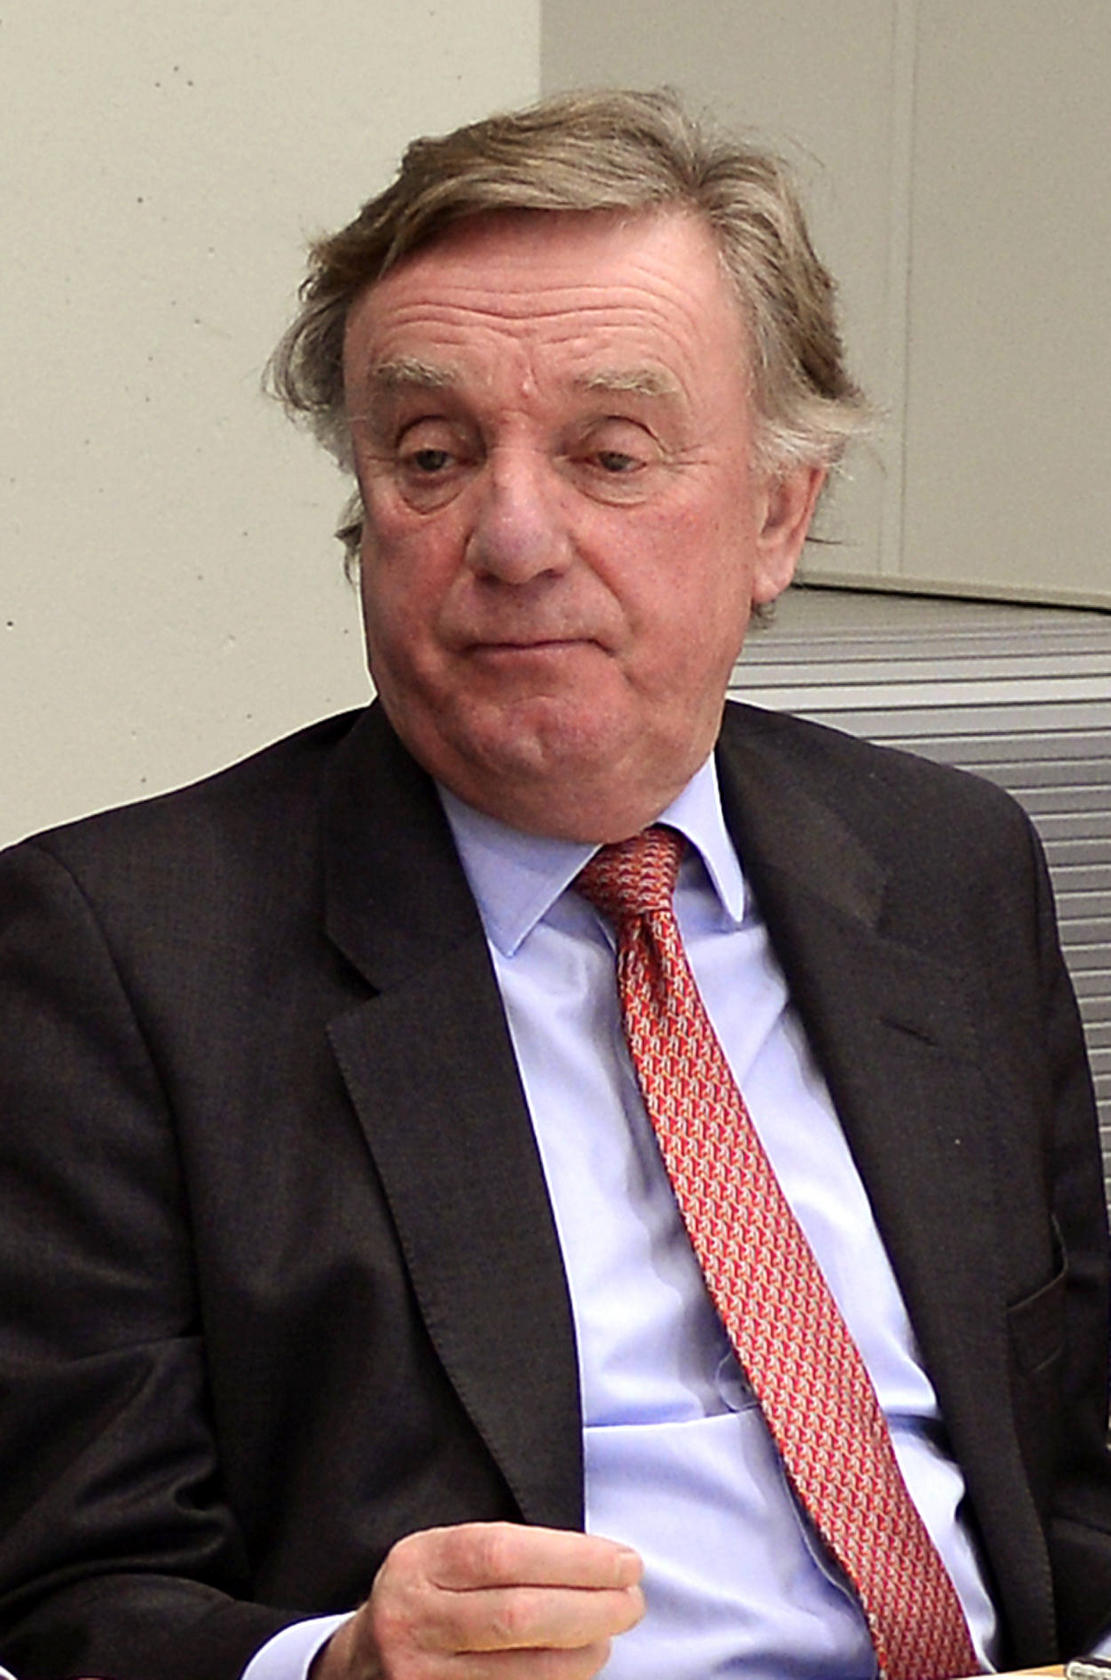 British Parliamentary Foreign Affairs Committee chairman Richard Ottaway says the trip was necessary despite Beijing's warnings.